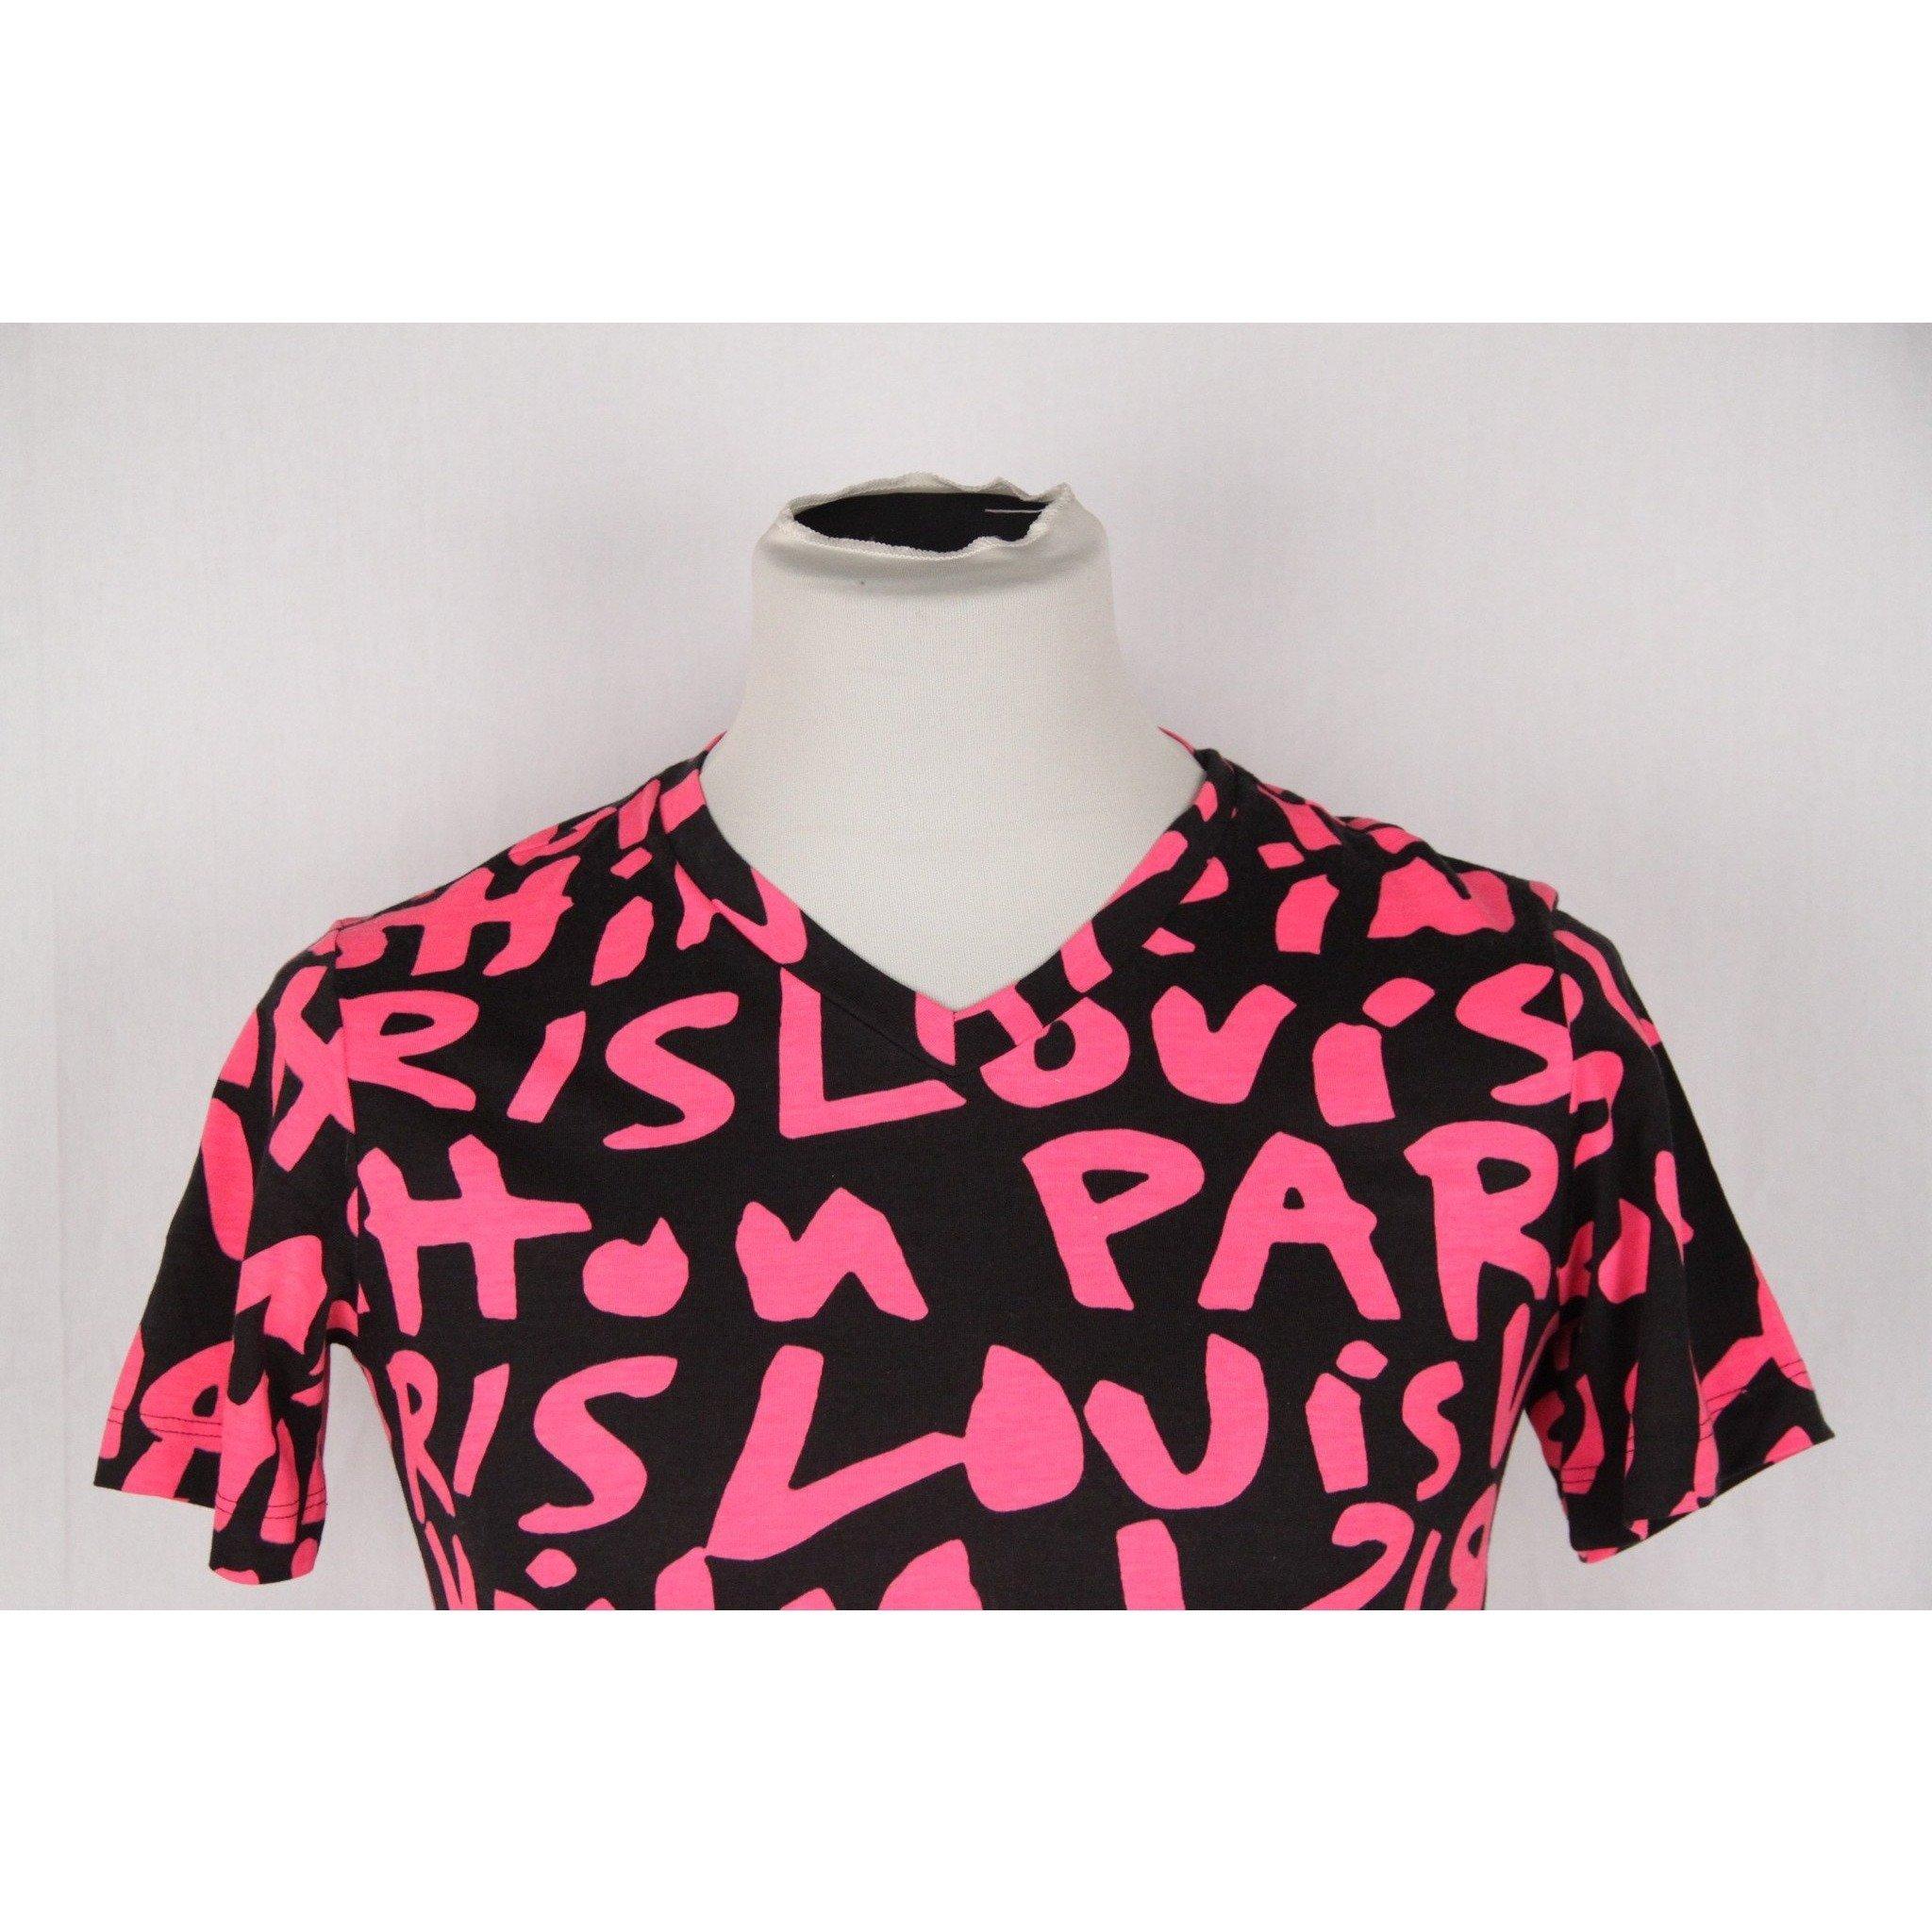 - Men's Louis Vuitton Stephen Sprouse Graffiti T-Shirt
- Black / Neon Pink
- Short Sleeves
- Tonal Stitchings
- Composition: 50% Modal - 50% Cotton
- Slim fit
- Made in Italy
- Size: XS (The size shown for this item is the size indicated by the